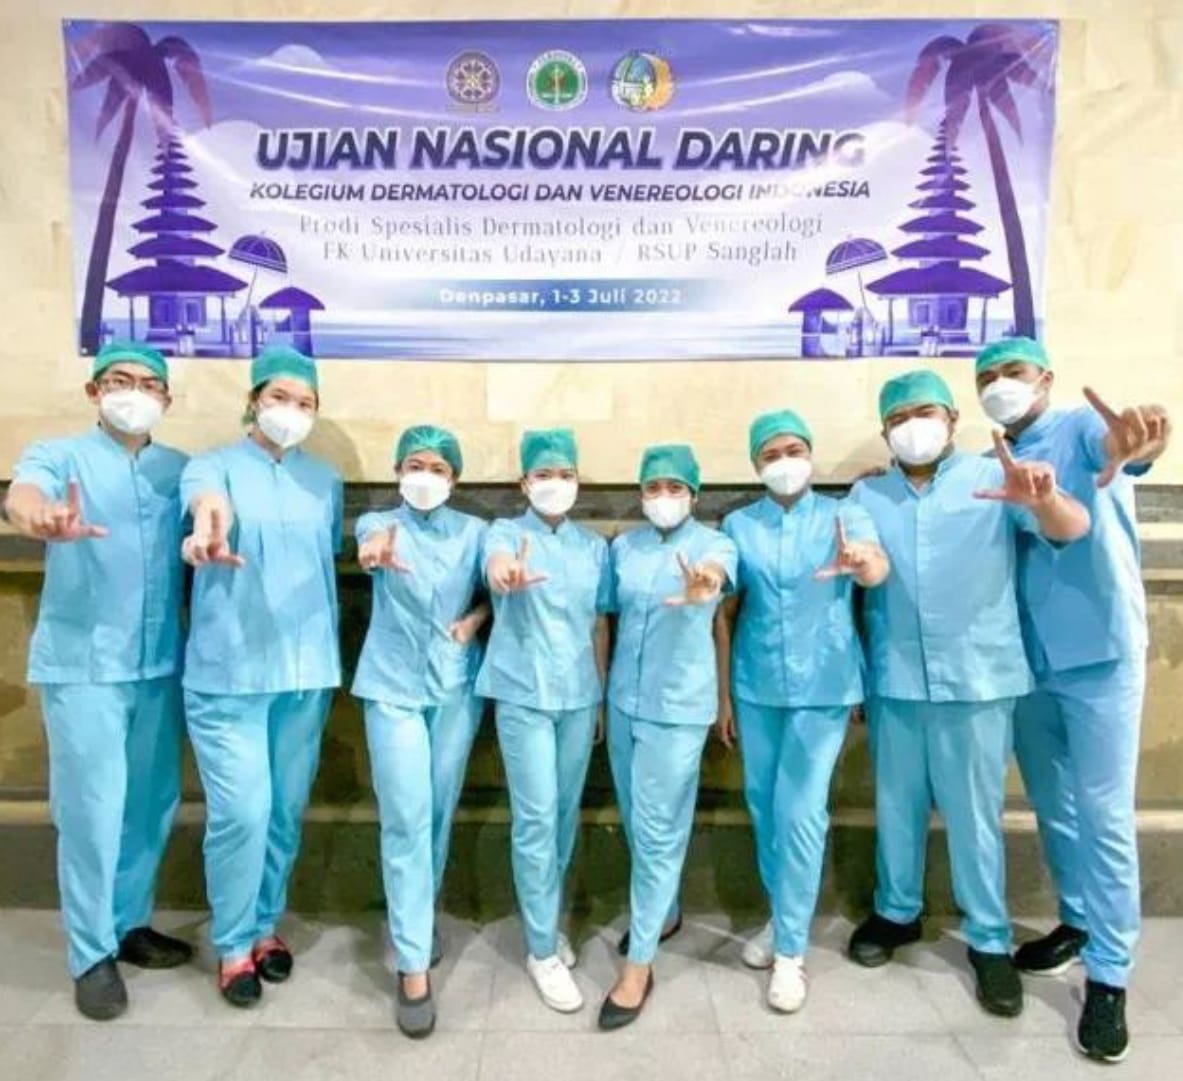 100% of Dermatology and Venereology Specialist Students of the Faculty of Medicine Udayana University Pass the DVI Collegium National Examination